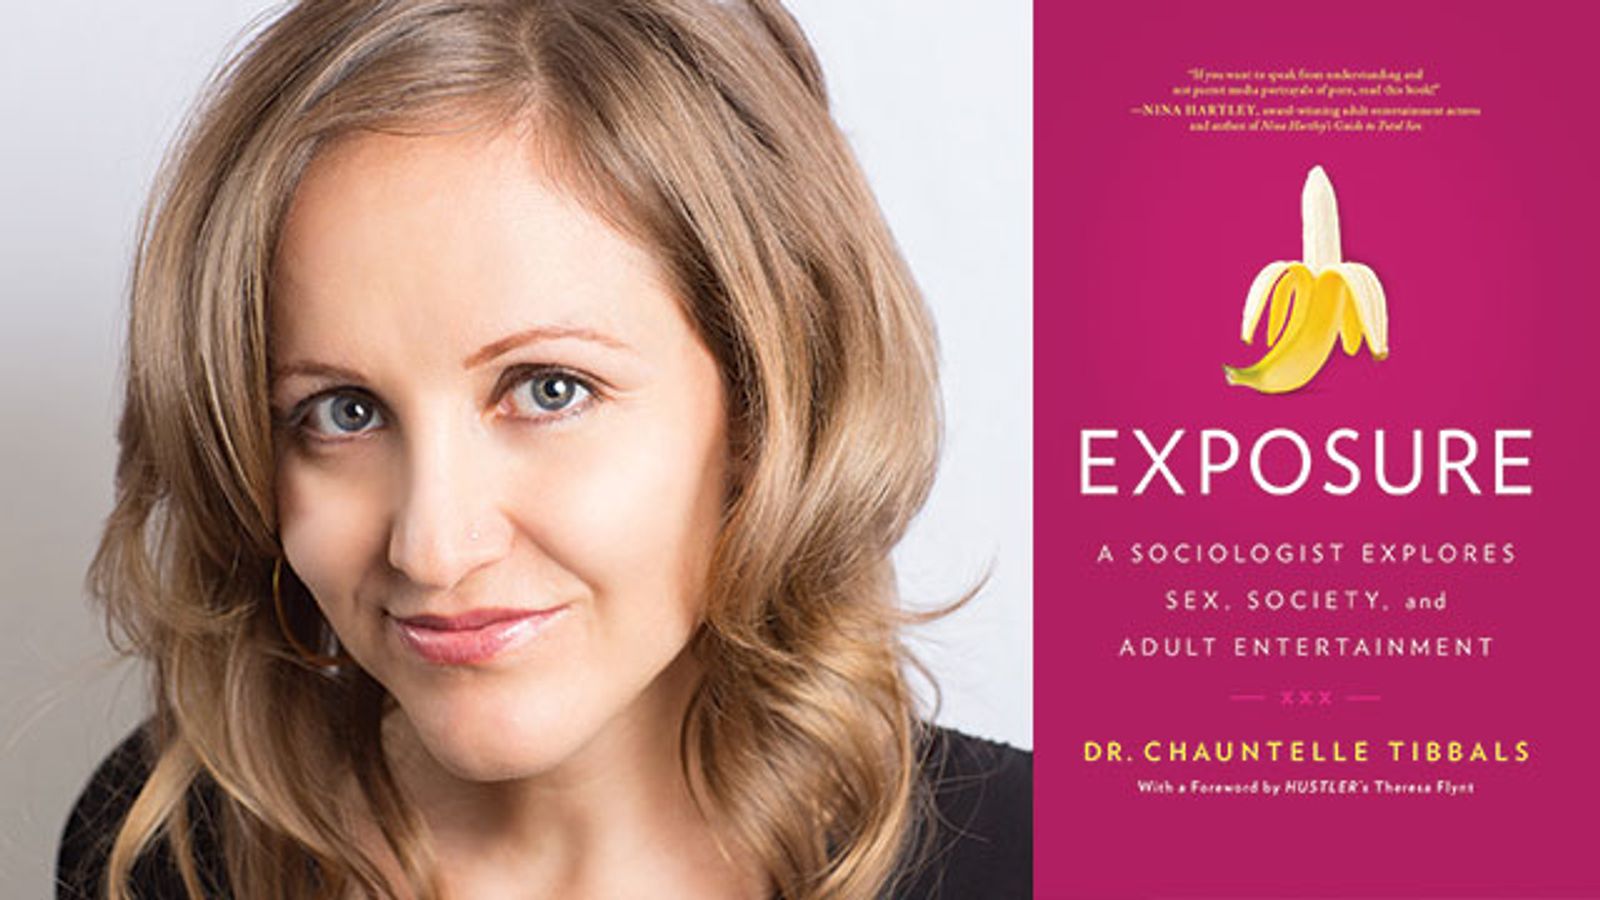 Dr. Chauntelle Tibbals Brings 'Exposure' Tour to Oklahoma City